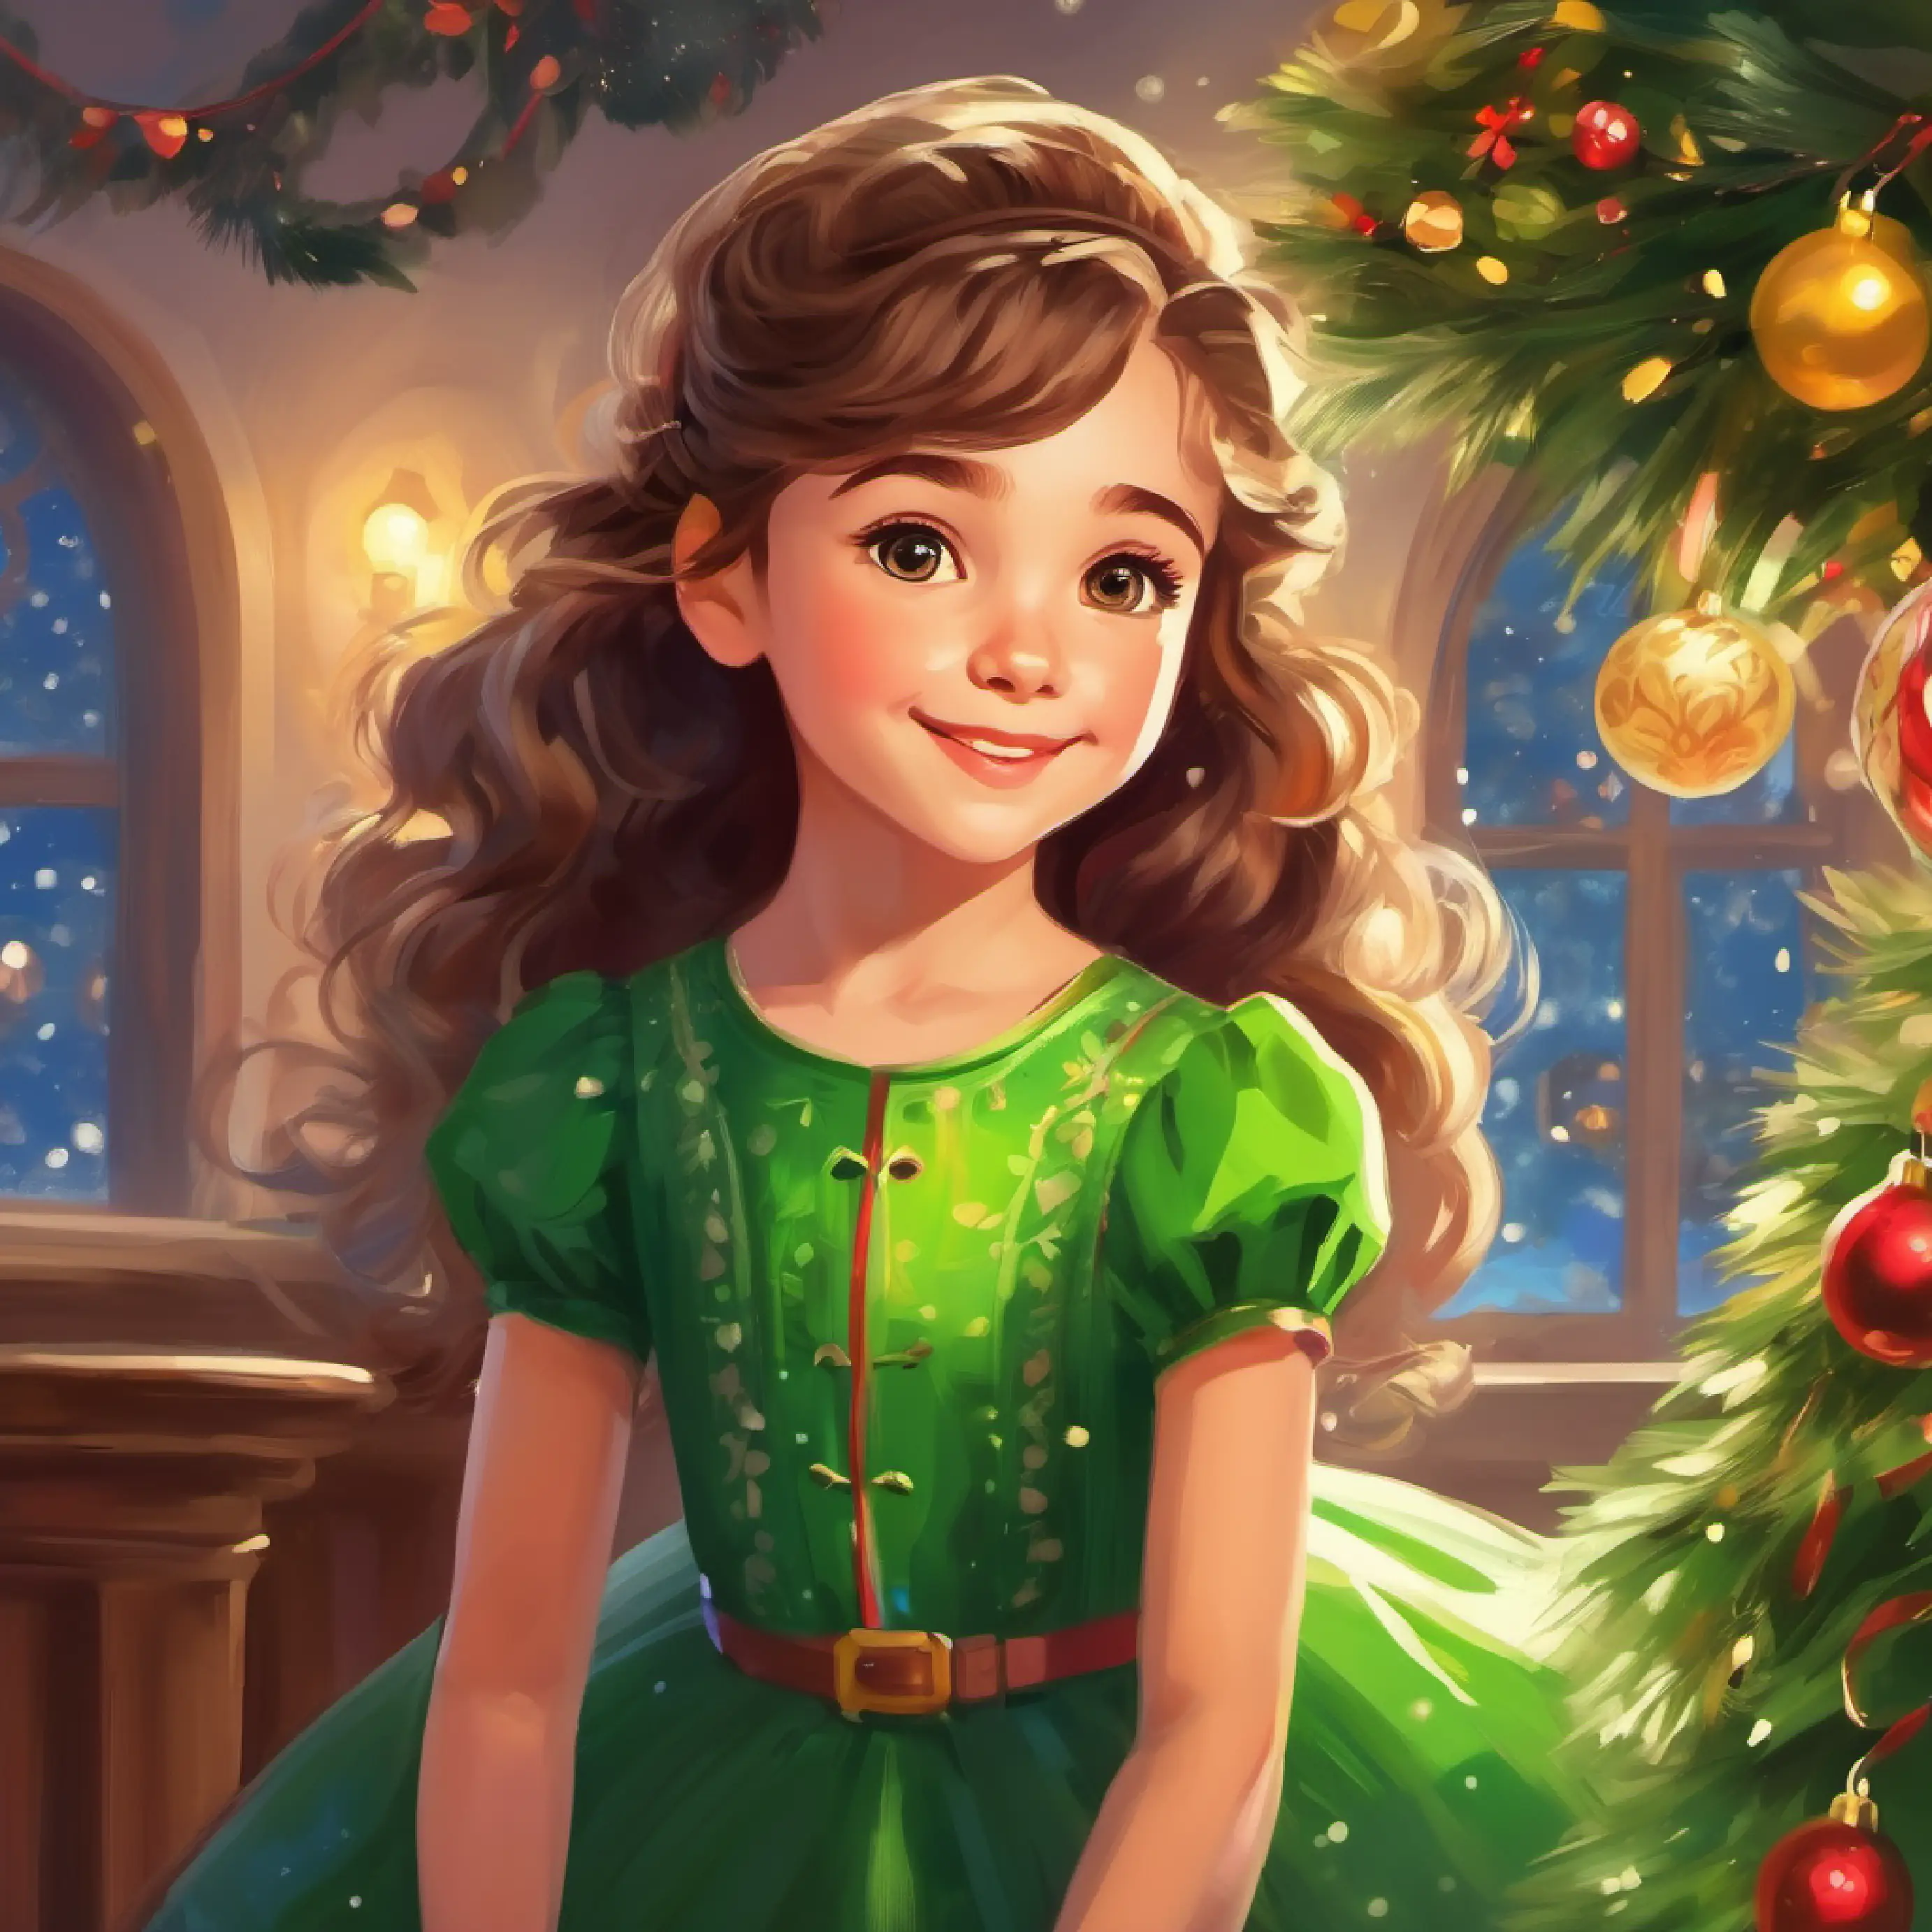 Young girl, cheerful, light-skinned, with bright green eyes wearing a pretty dress, still not content.